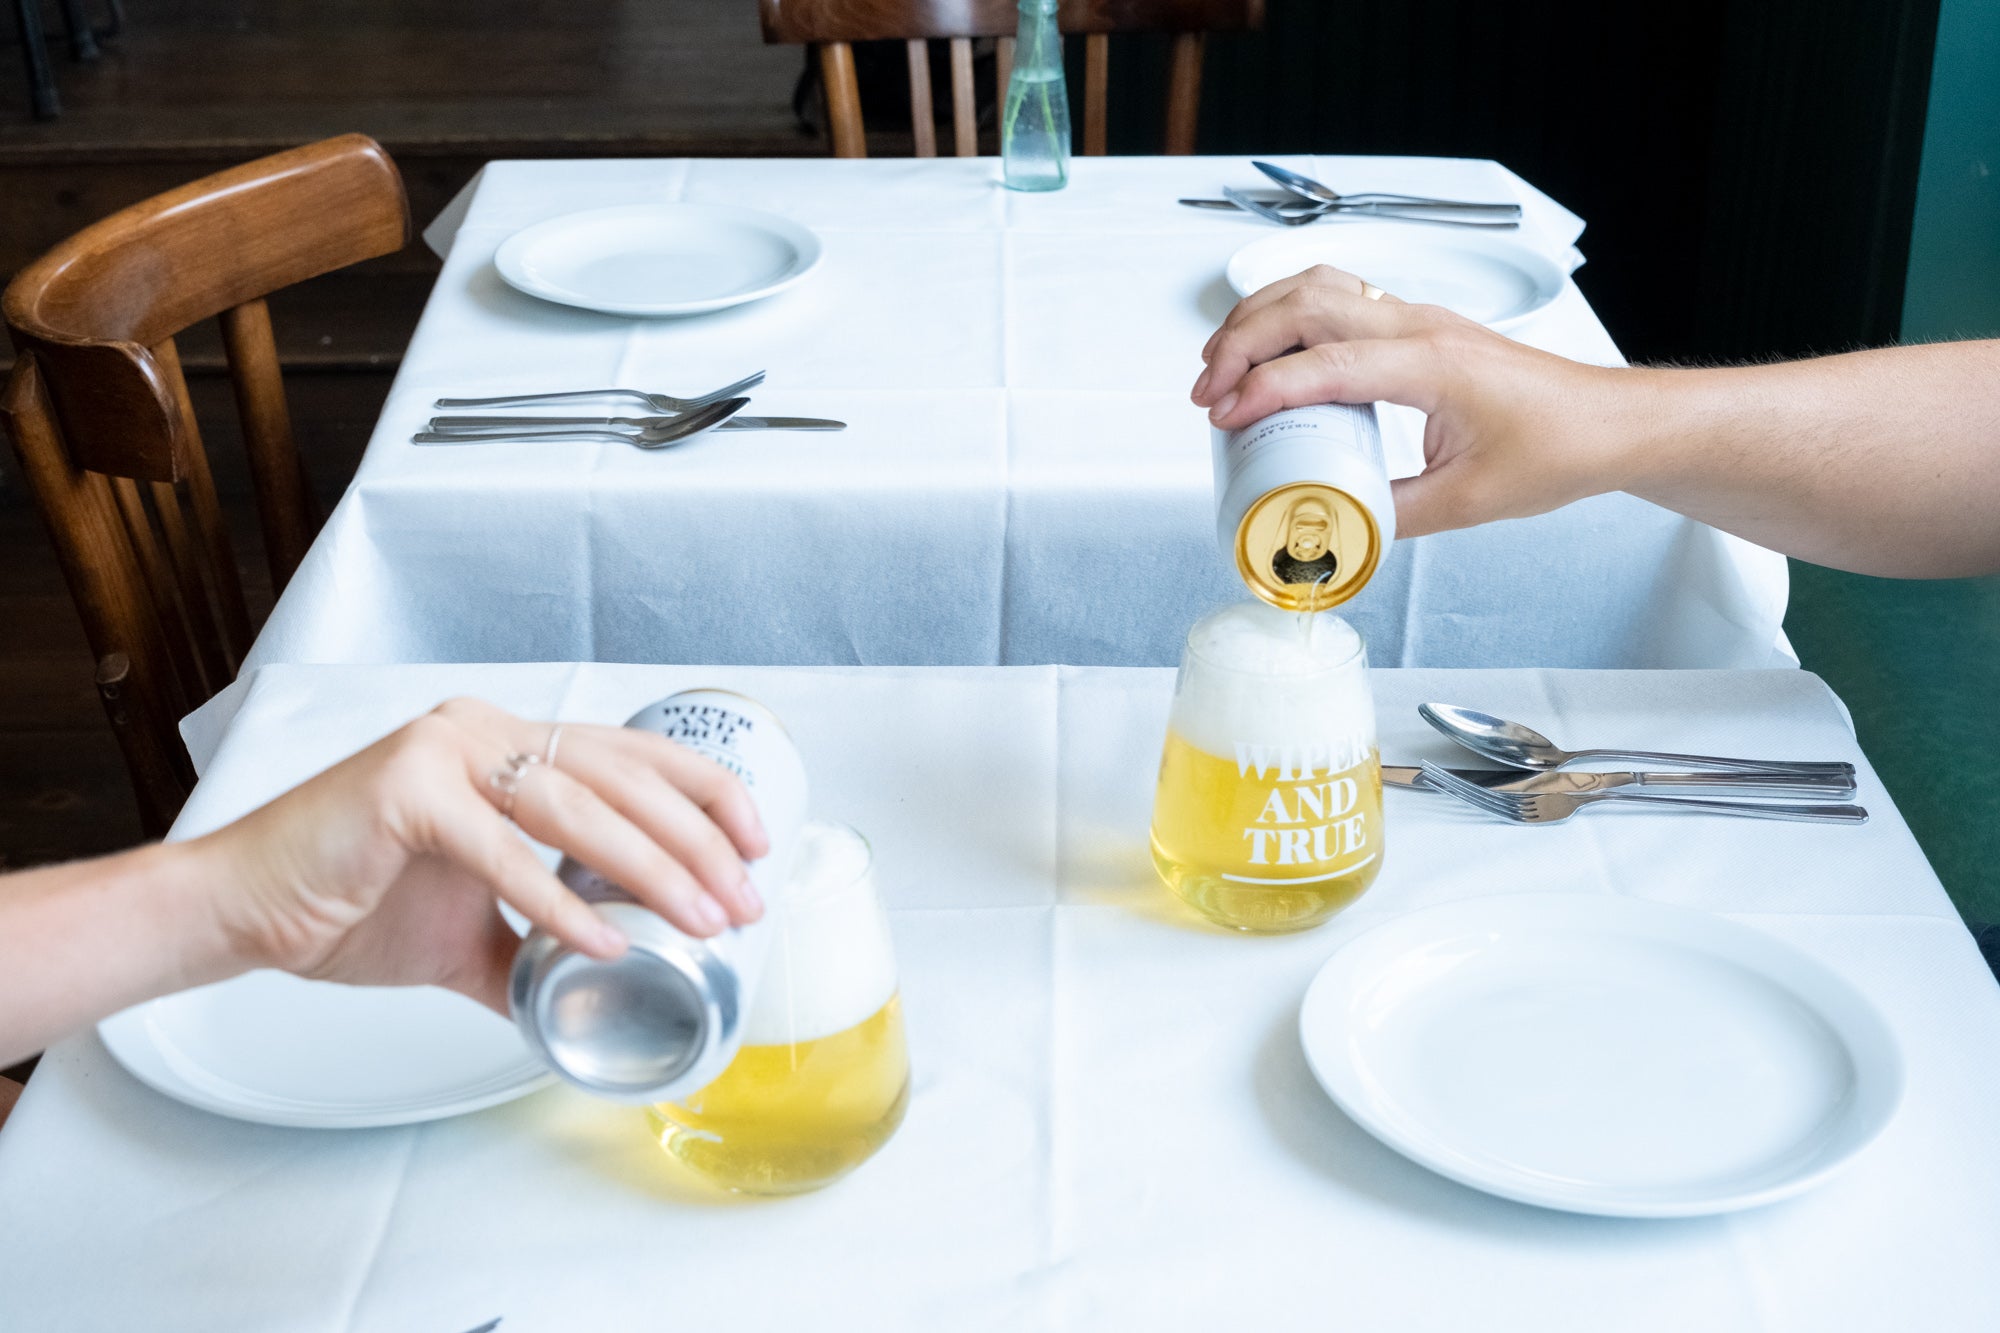 Two hands pouring beer from white cans into glasses on a table covered with a white tablecloth